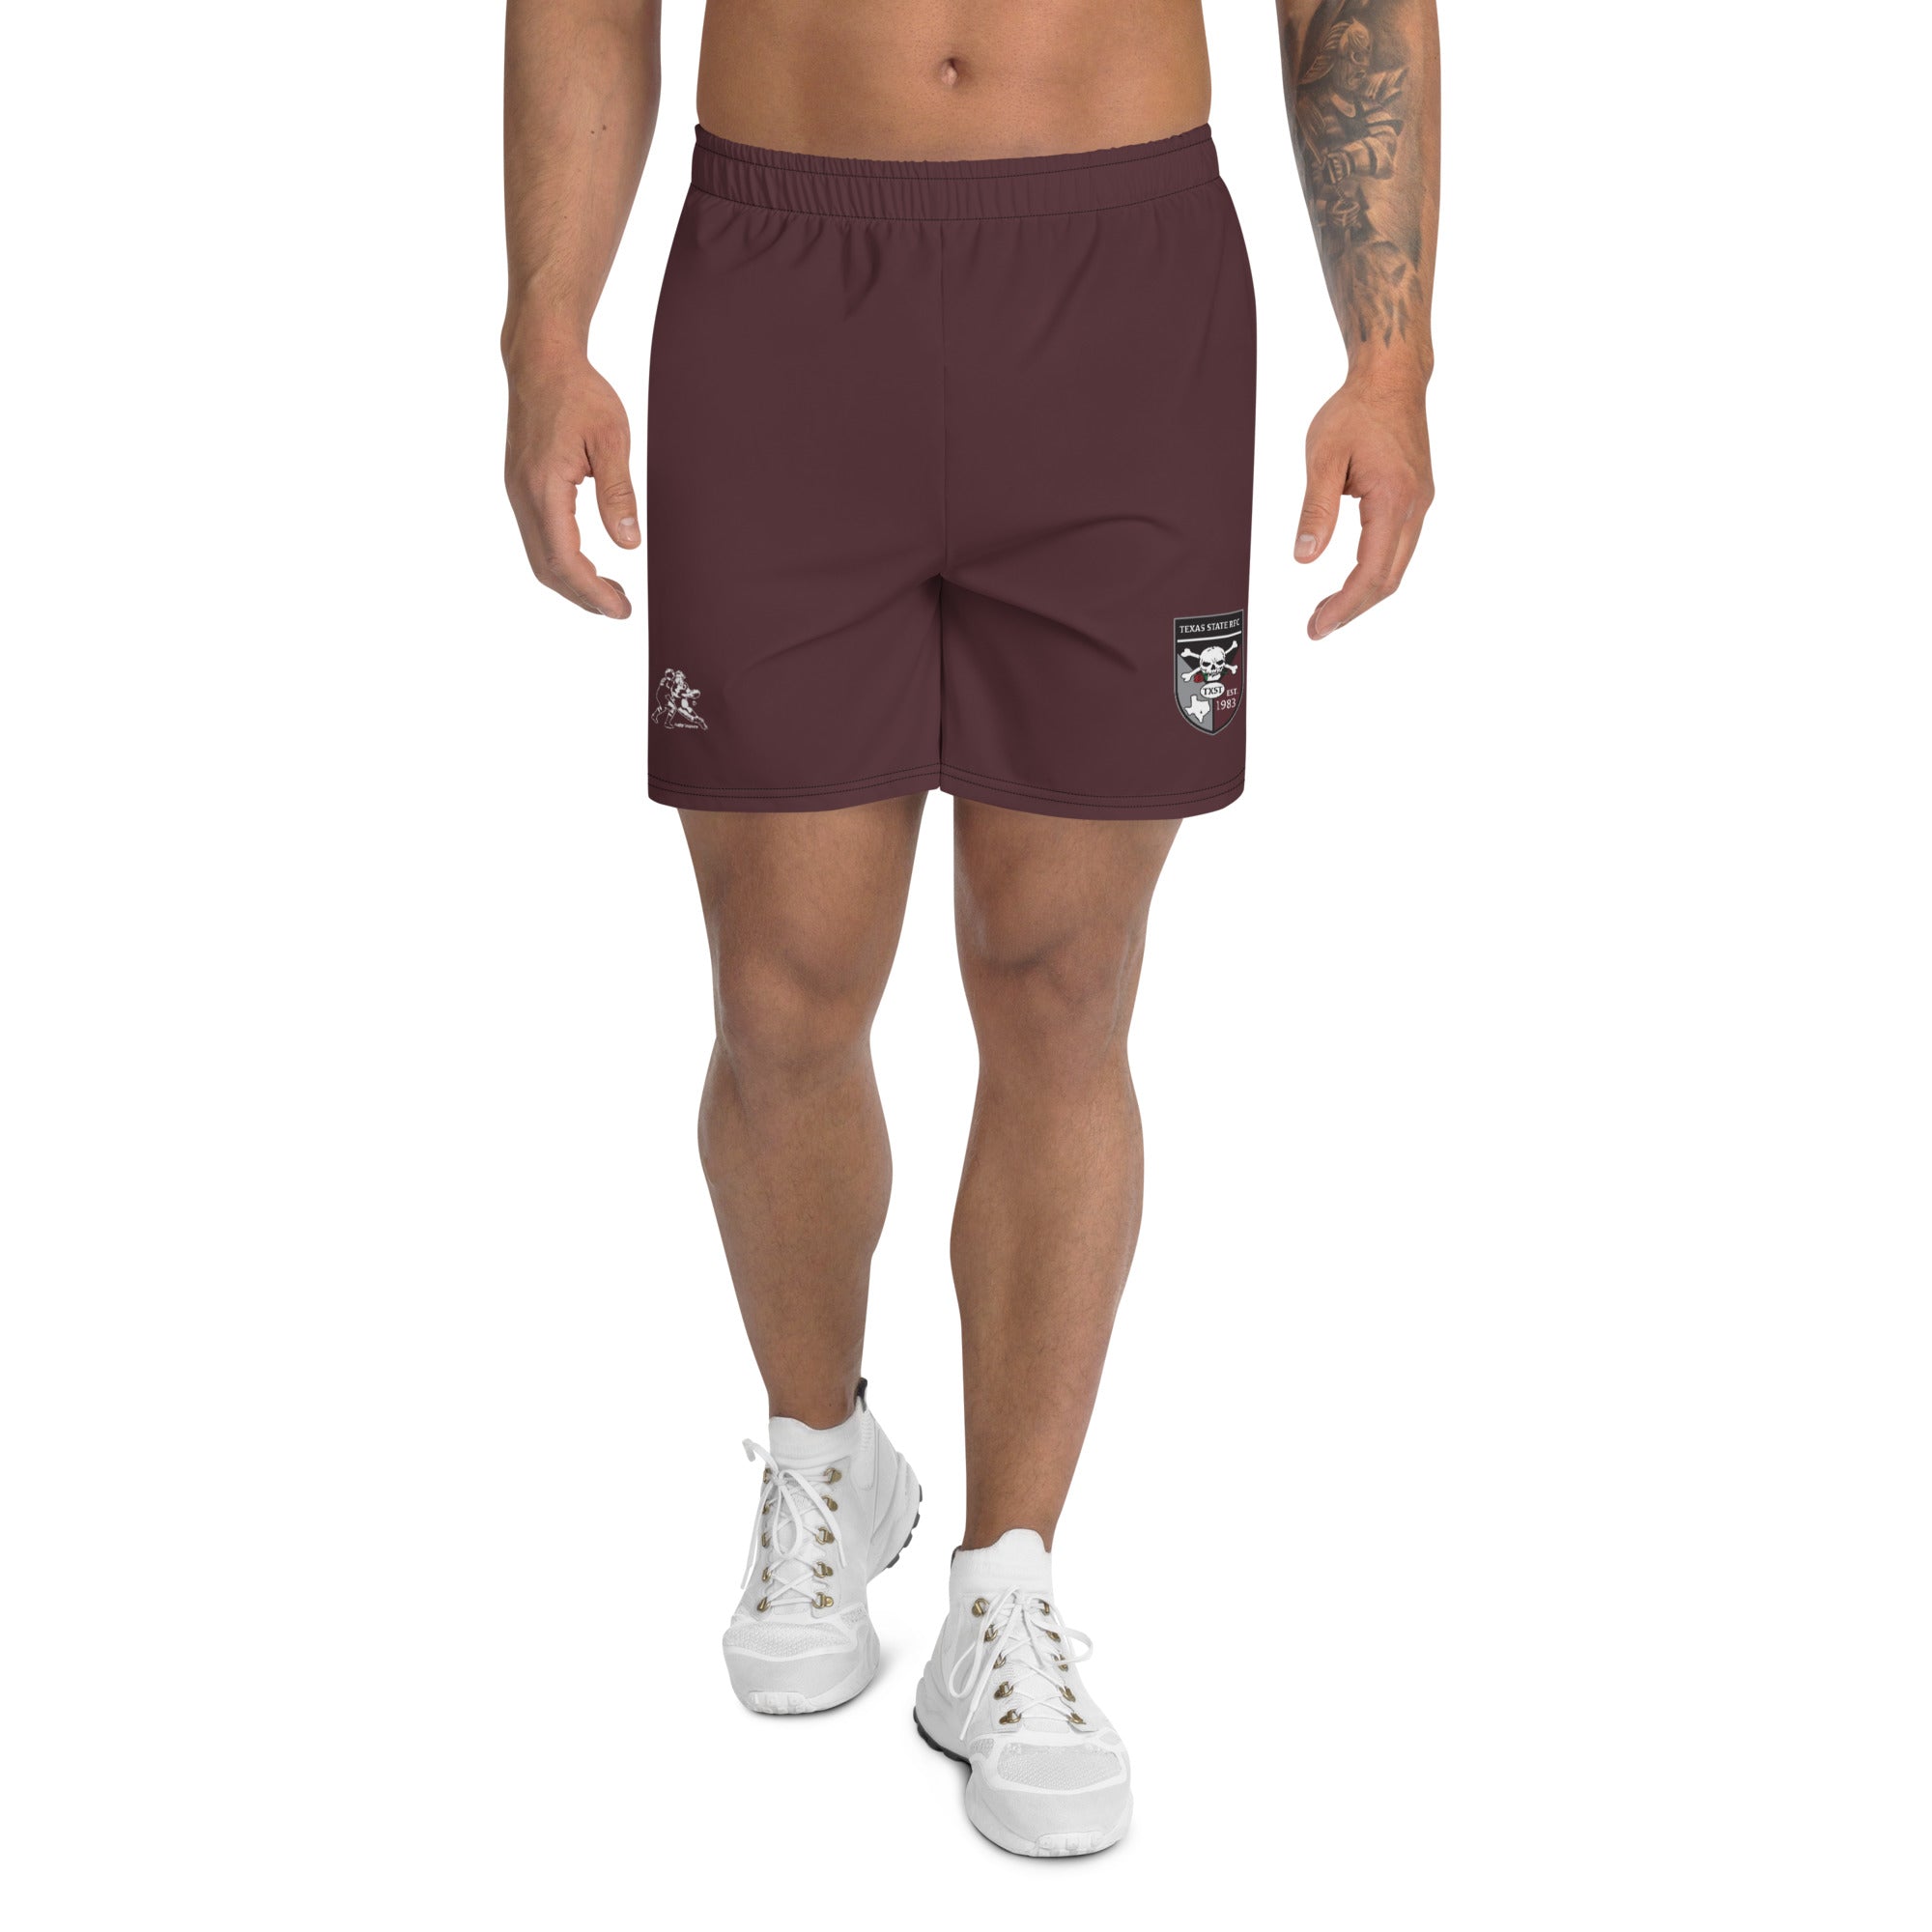 Rugby Imports Texas State Rugby Athletic Shorts